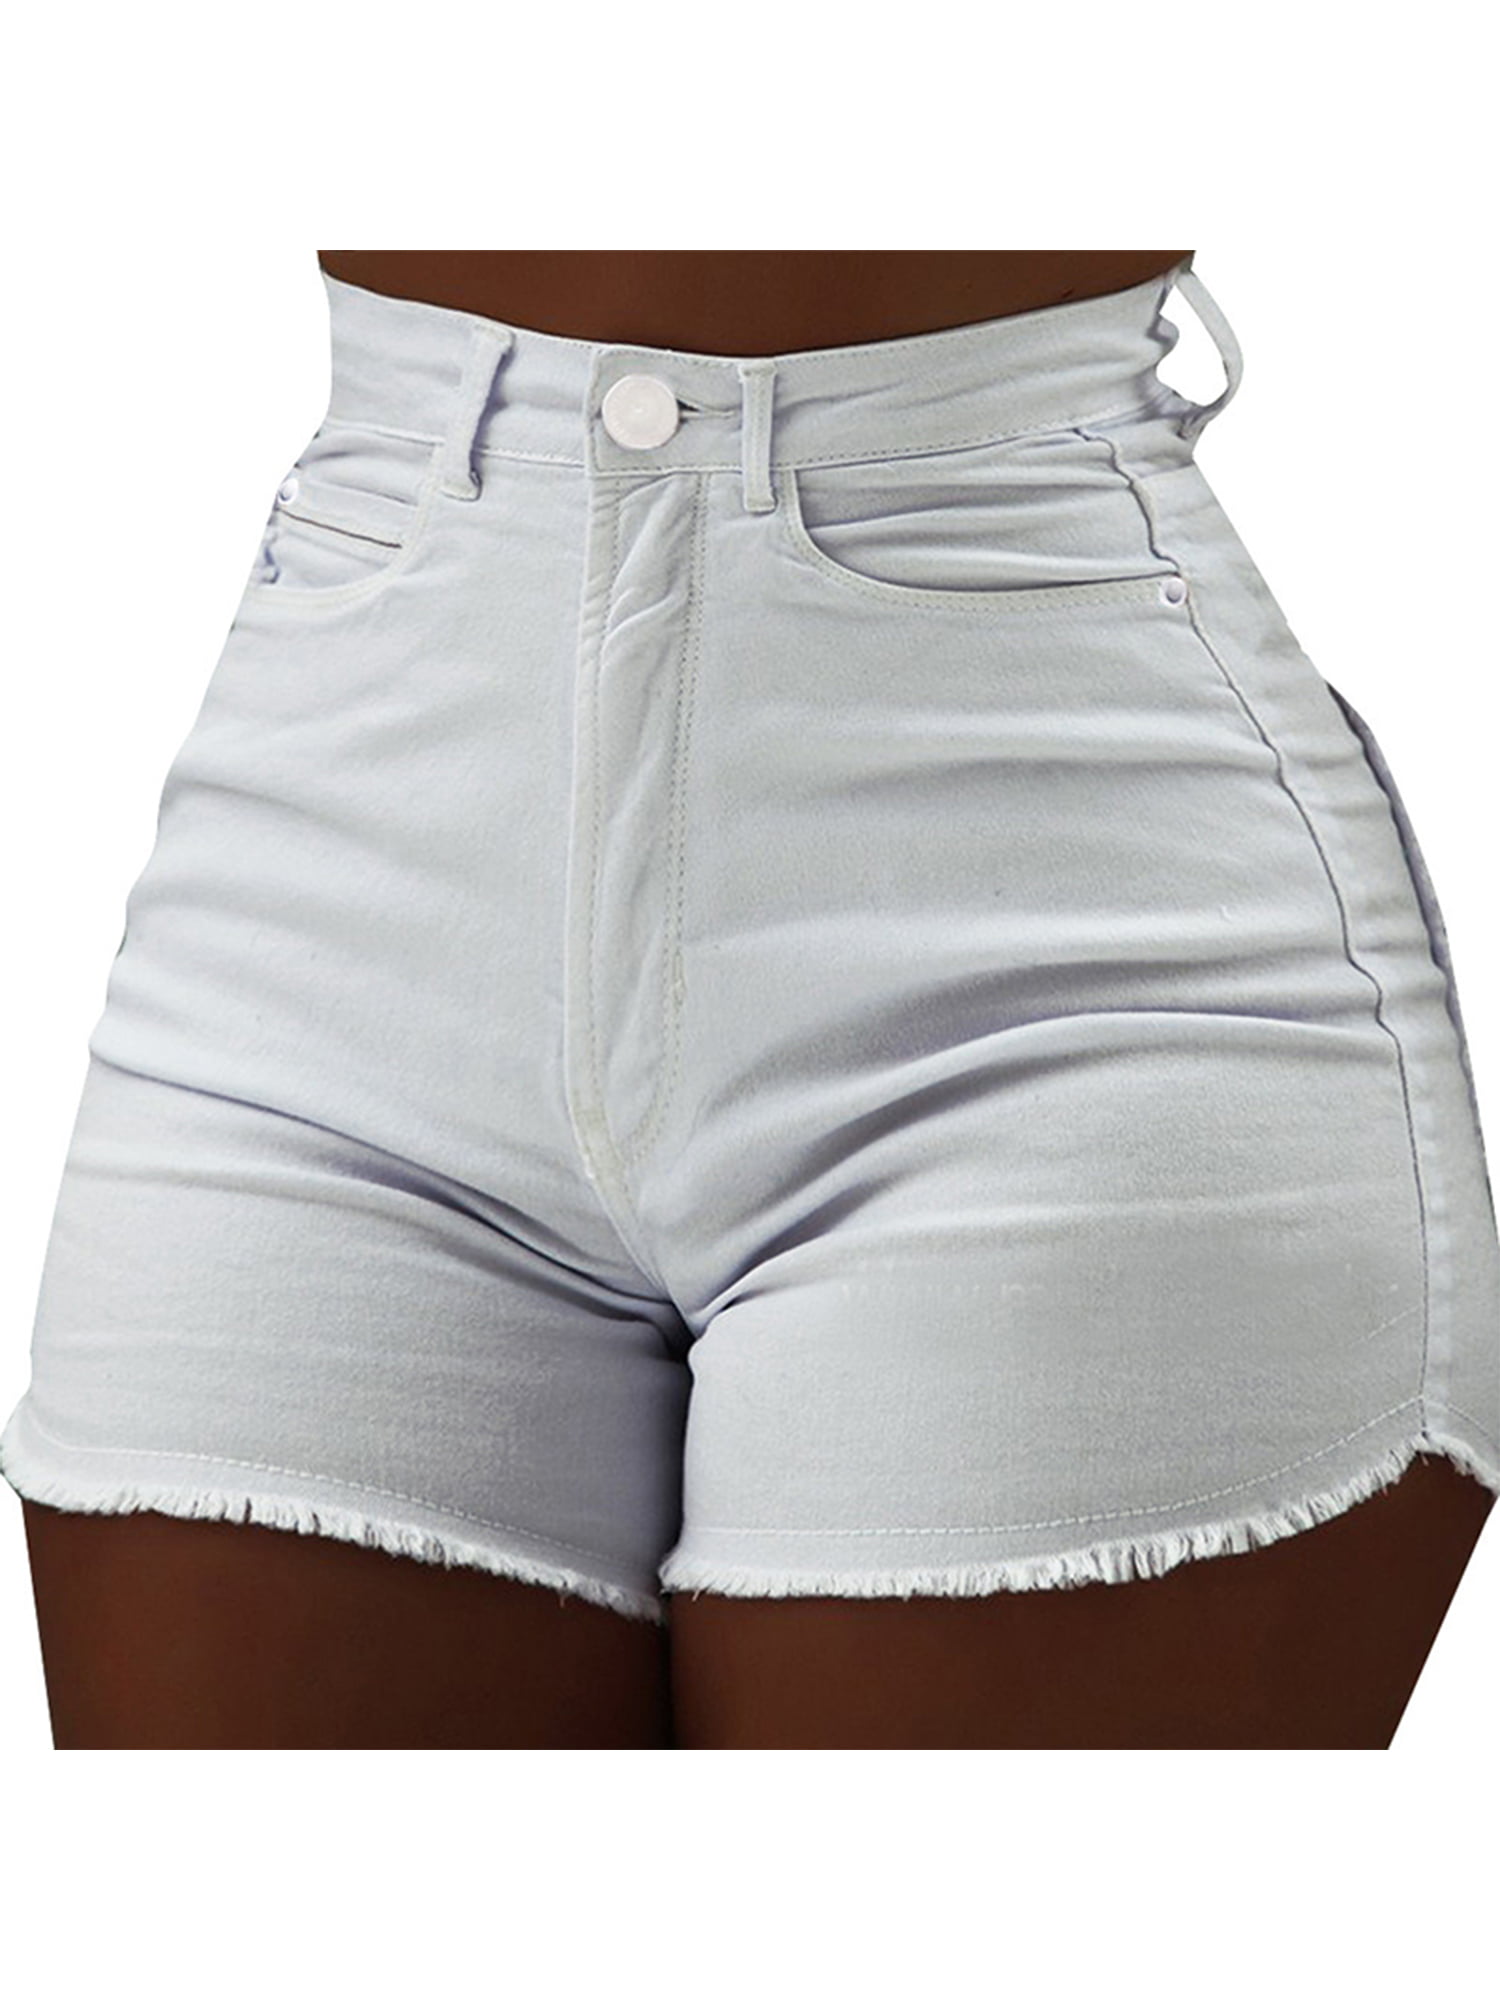 Wodstyle Women High Waisted Denim Jeans Shorts Summer Casual Stretch Hot Short Pants Mini